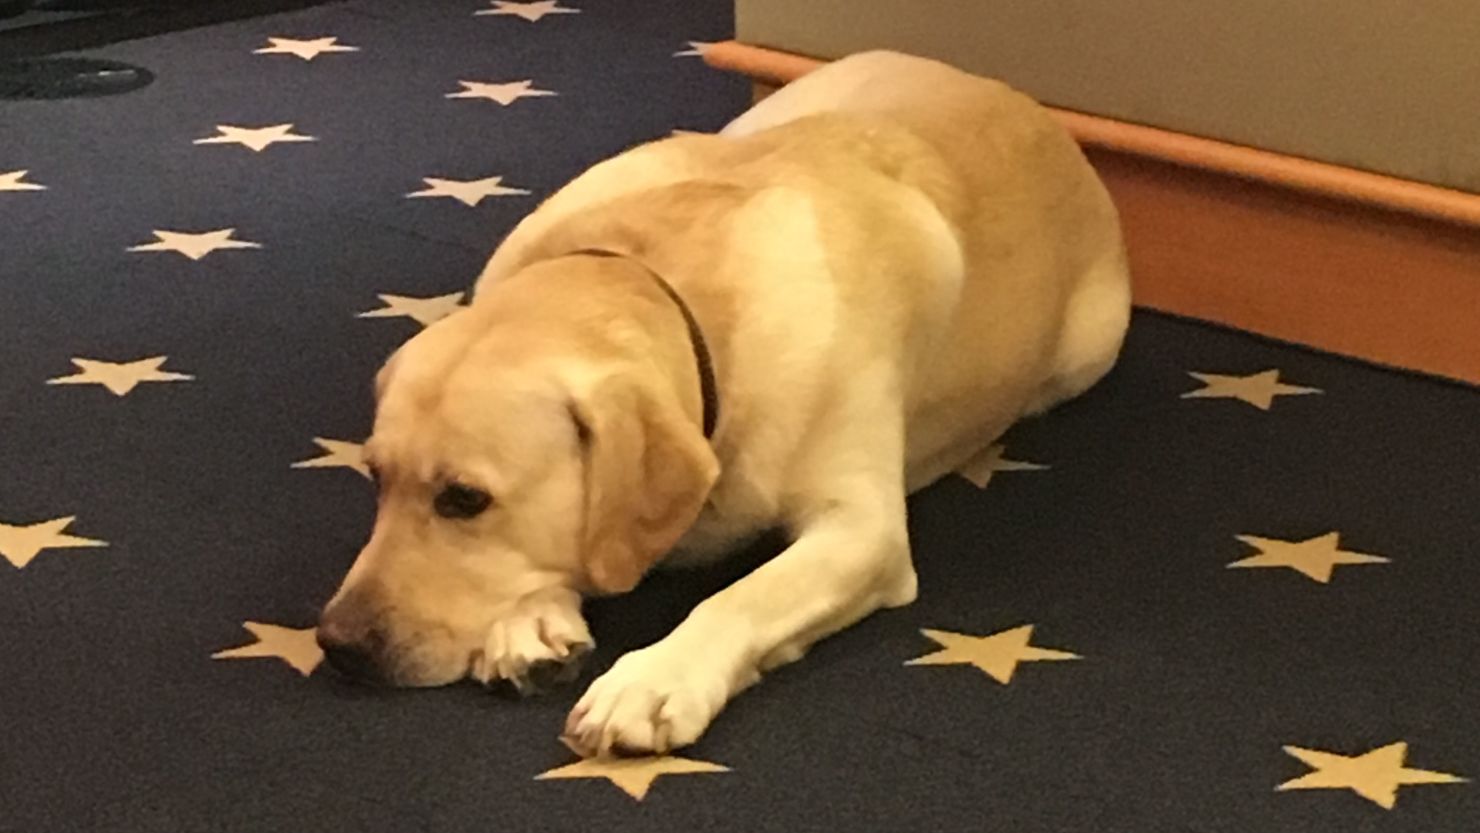 John Kerry's dog lies beside him as he gives his final State Department press conference.